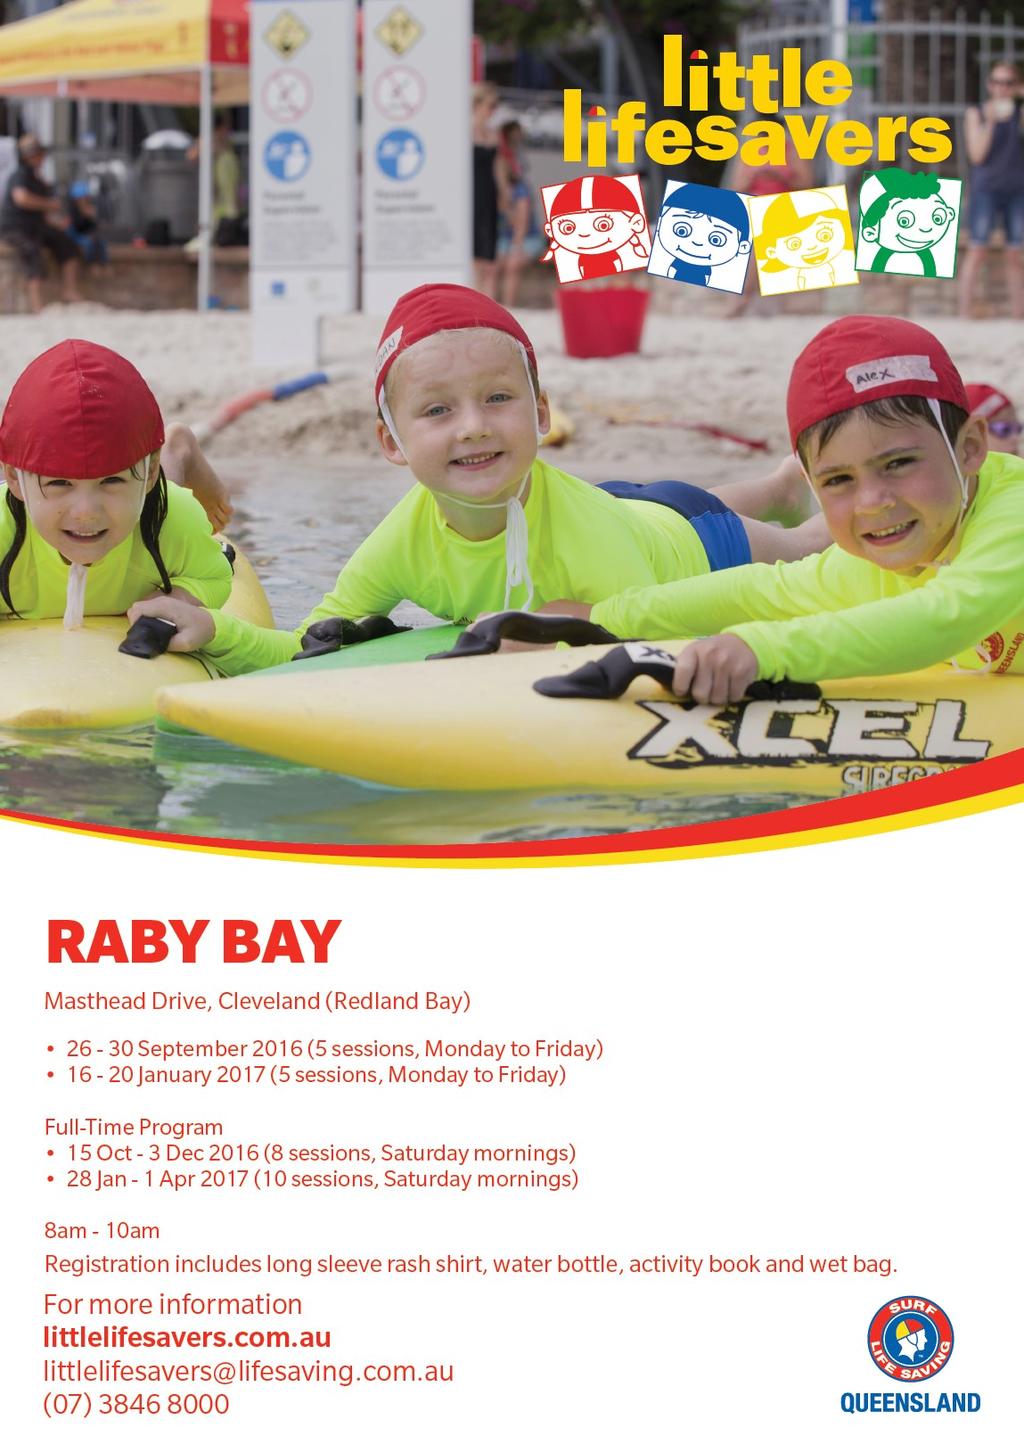 Community News Surf Life Saving Queensland runs the community based Little Lifesavers program at several locations across Queensland including Raby Bay.